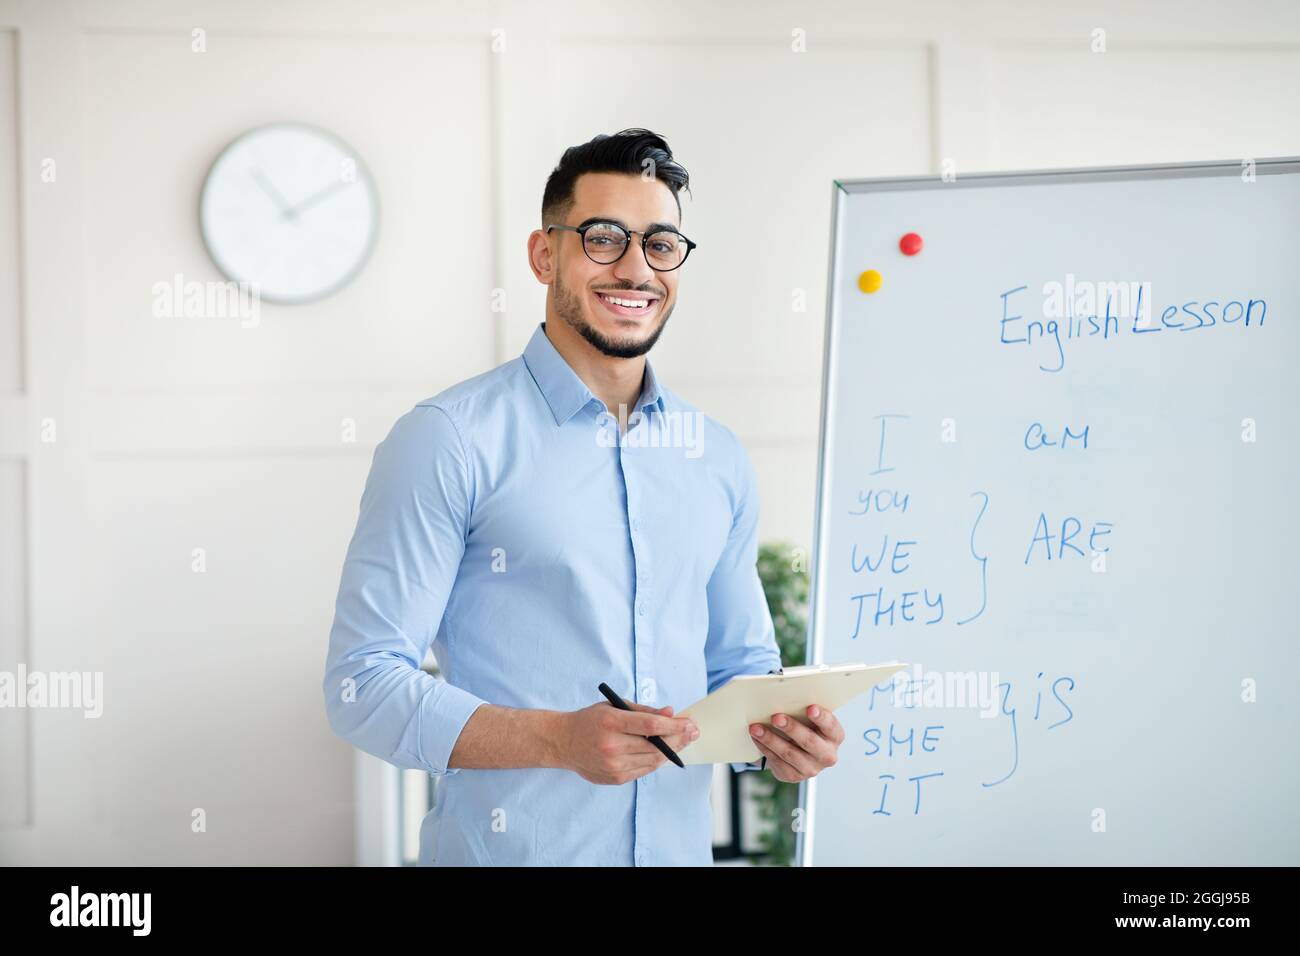 Arab male English teacher explaining rules near blackboard, standing with clipboard, smiling at camera in office Stock Photo